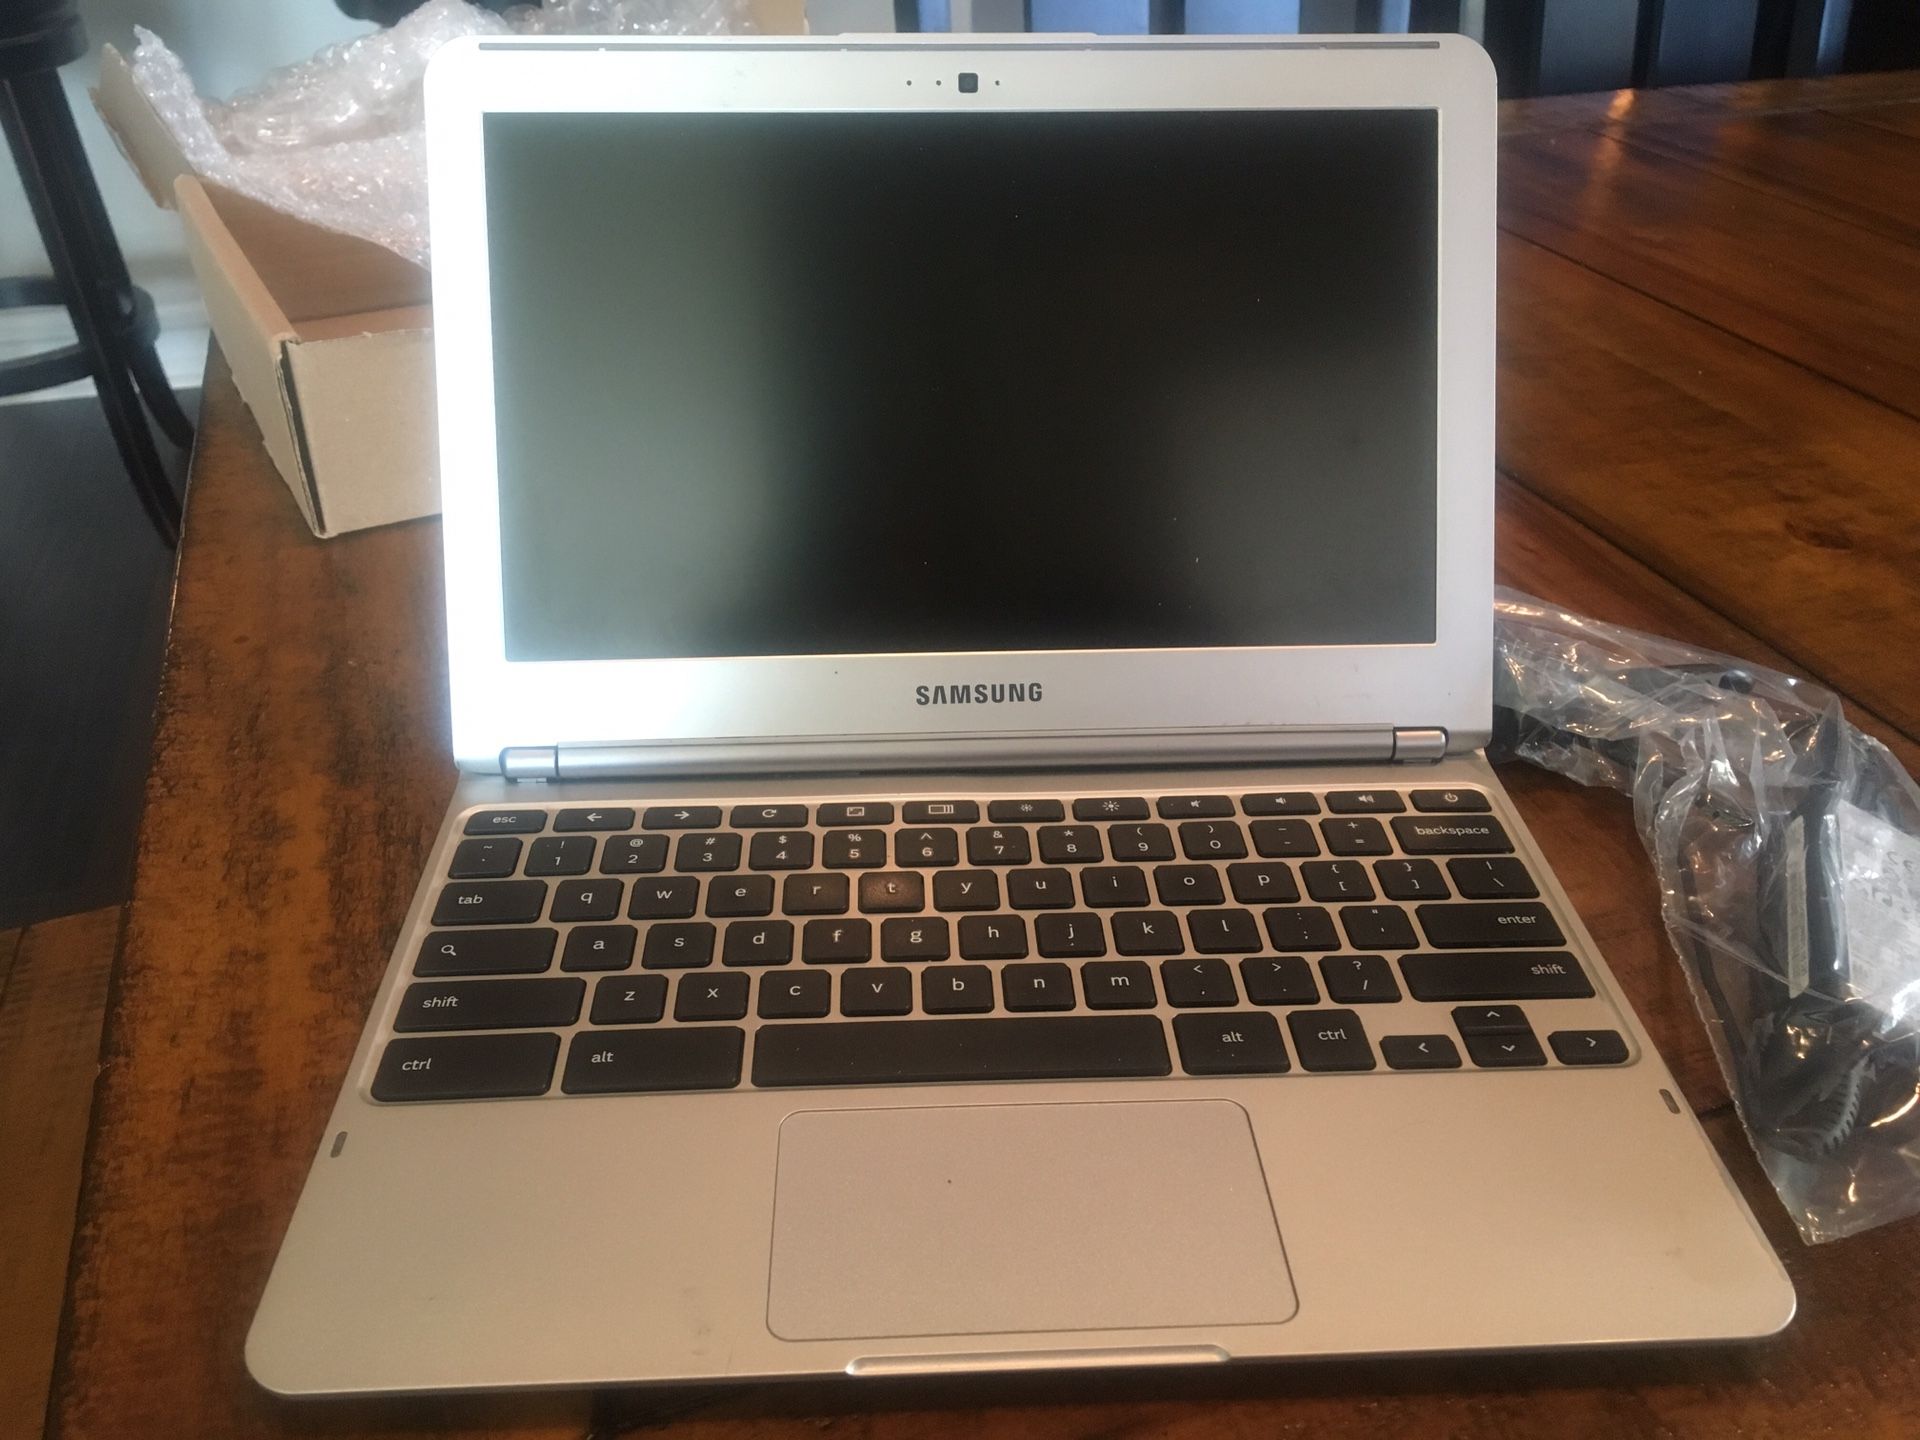 Samsung Chromebook 11.6” Silver-bought refurbished new. Still in box...we never used it. 2003;16 GB LED. Has a few scratches on exterior but in great